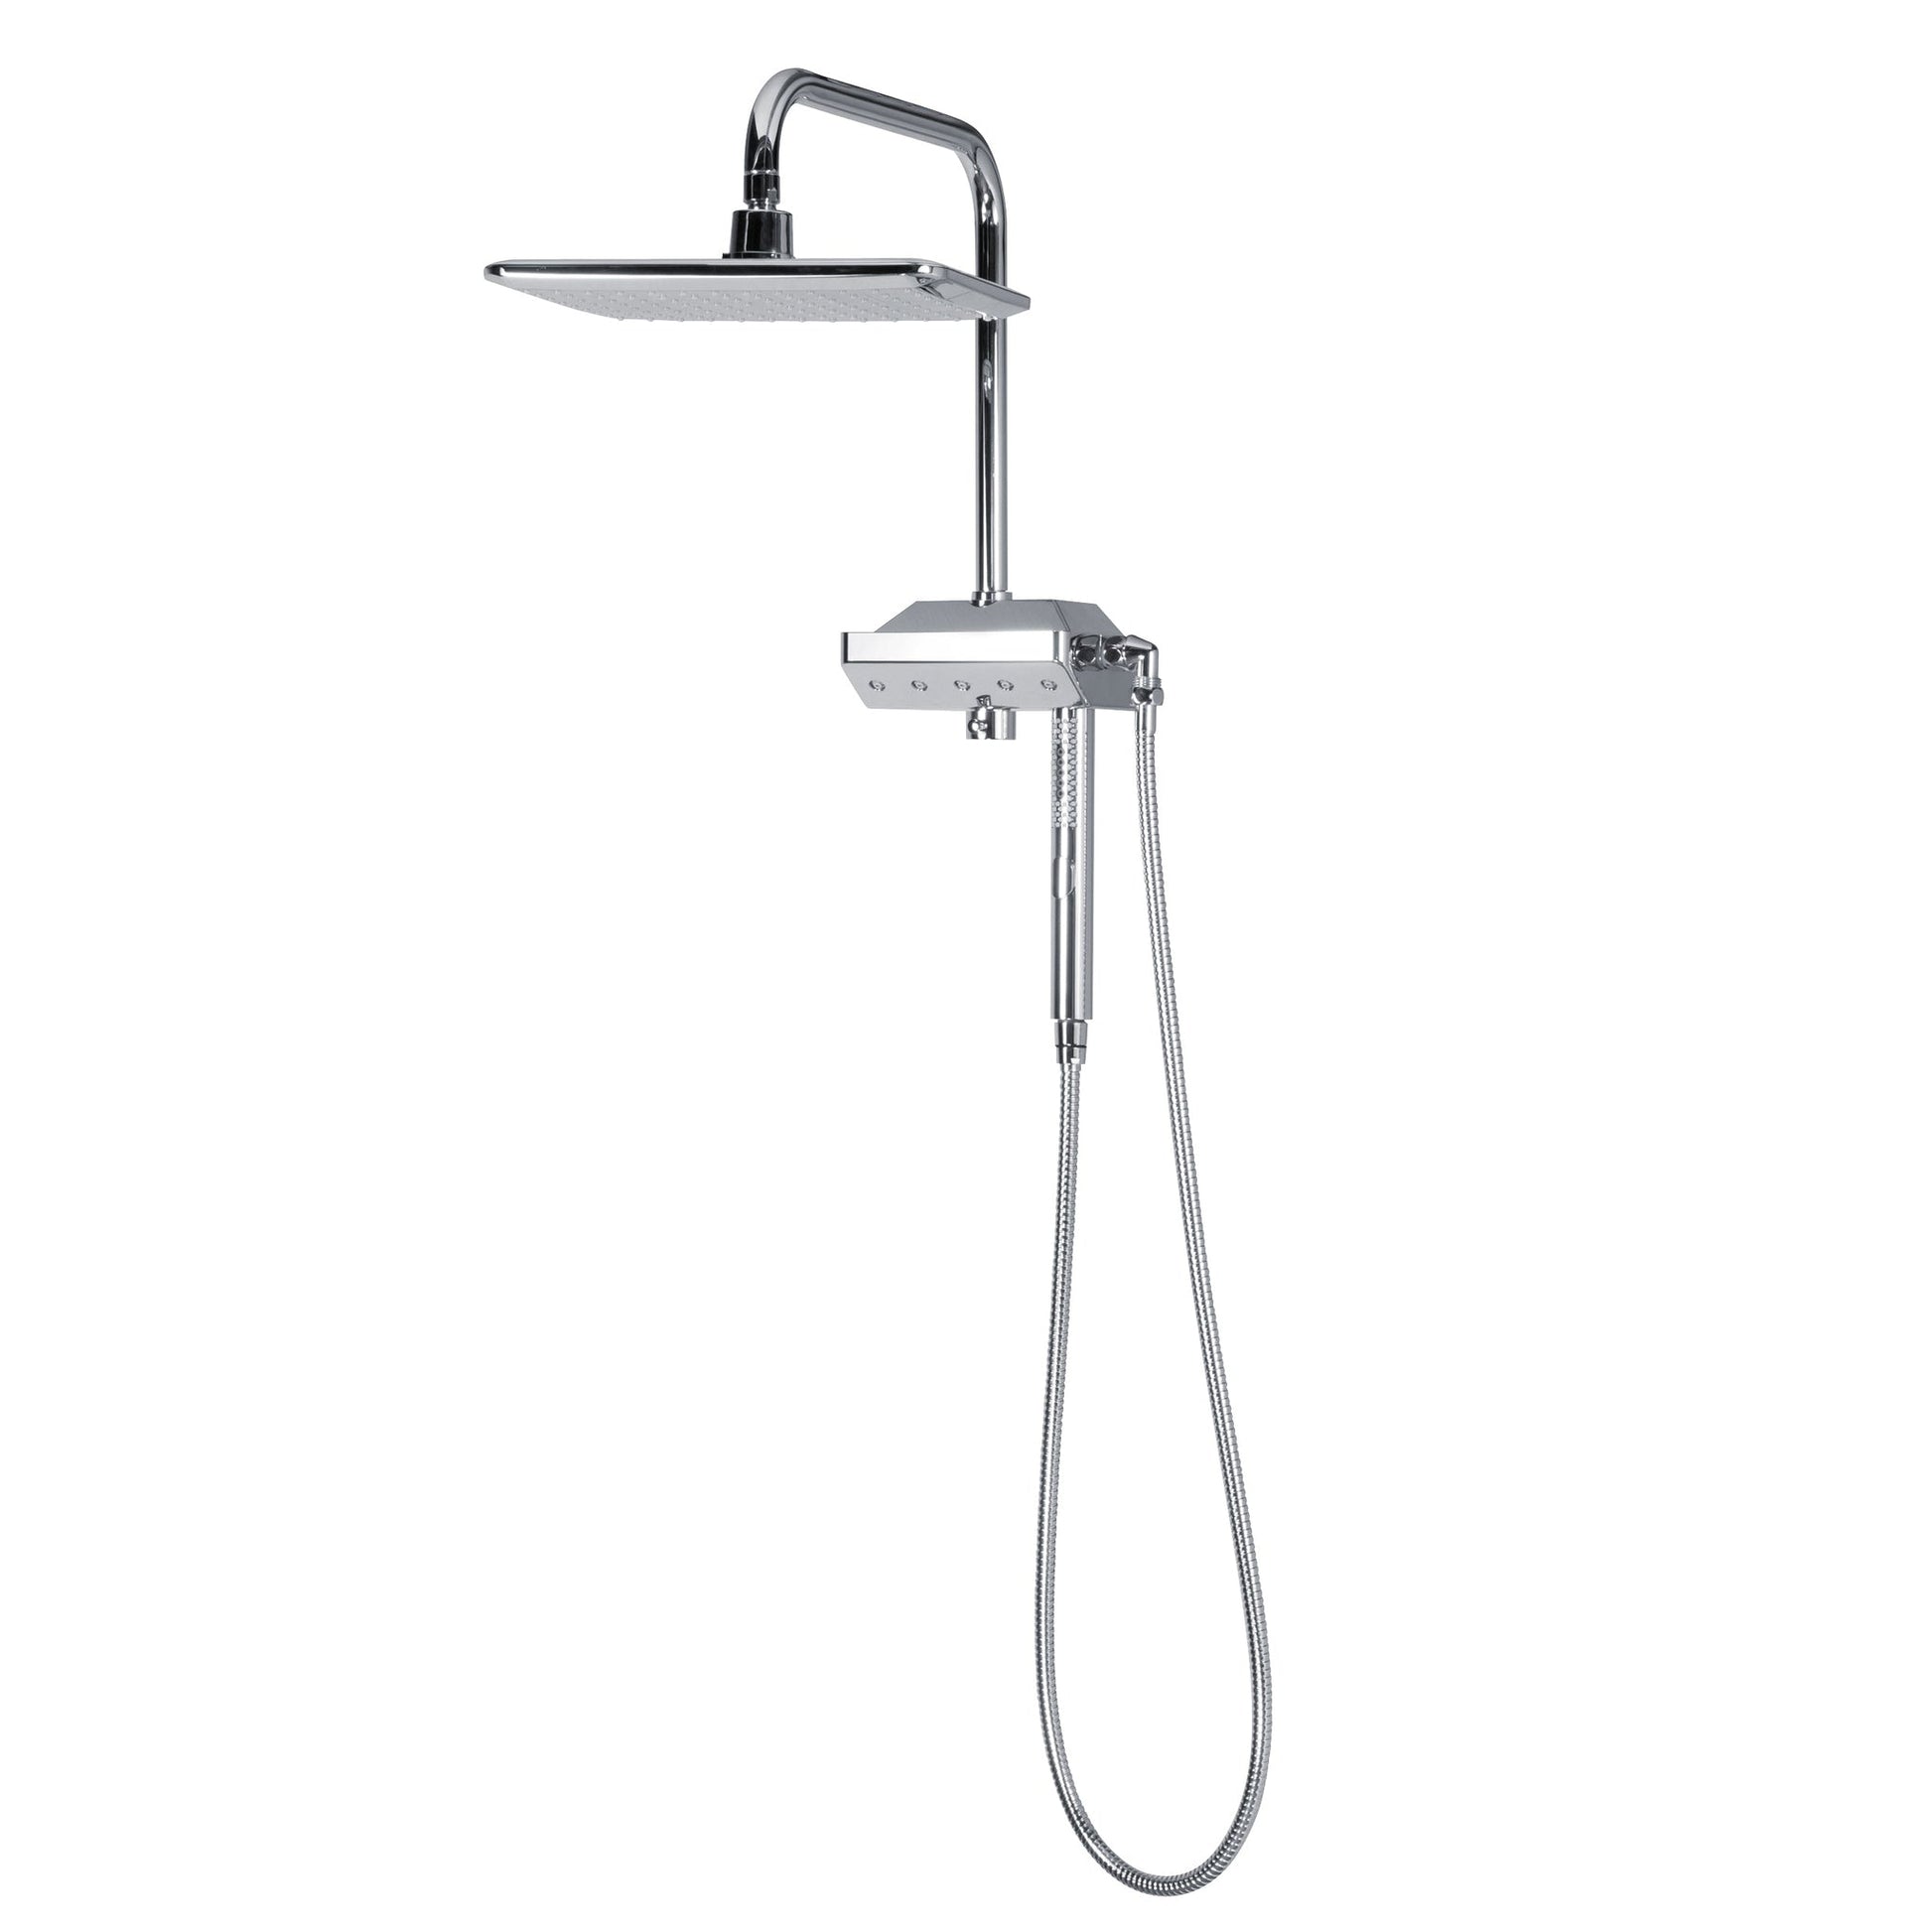 ALL METAL Handheld Shower Head with Hose and Brass Holder CHROME 2.5 GPM  High